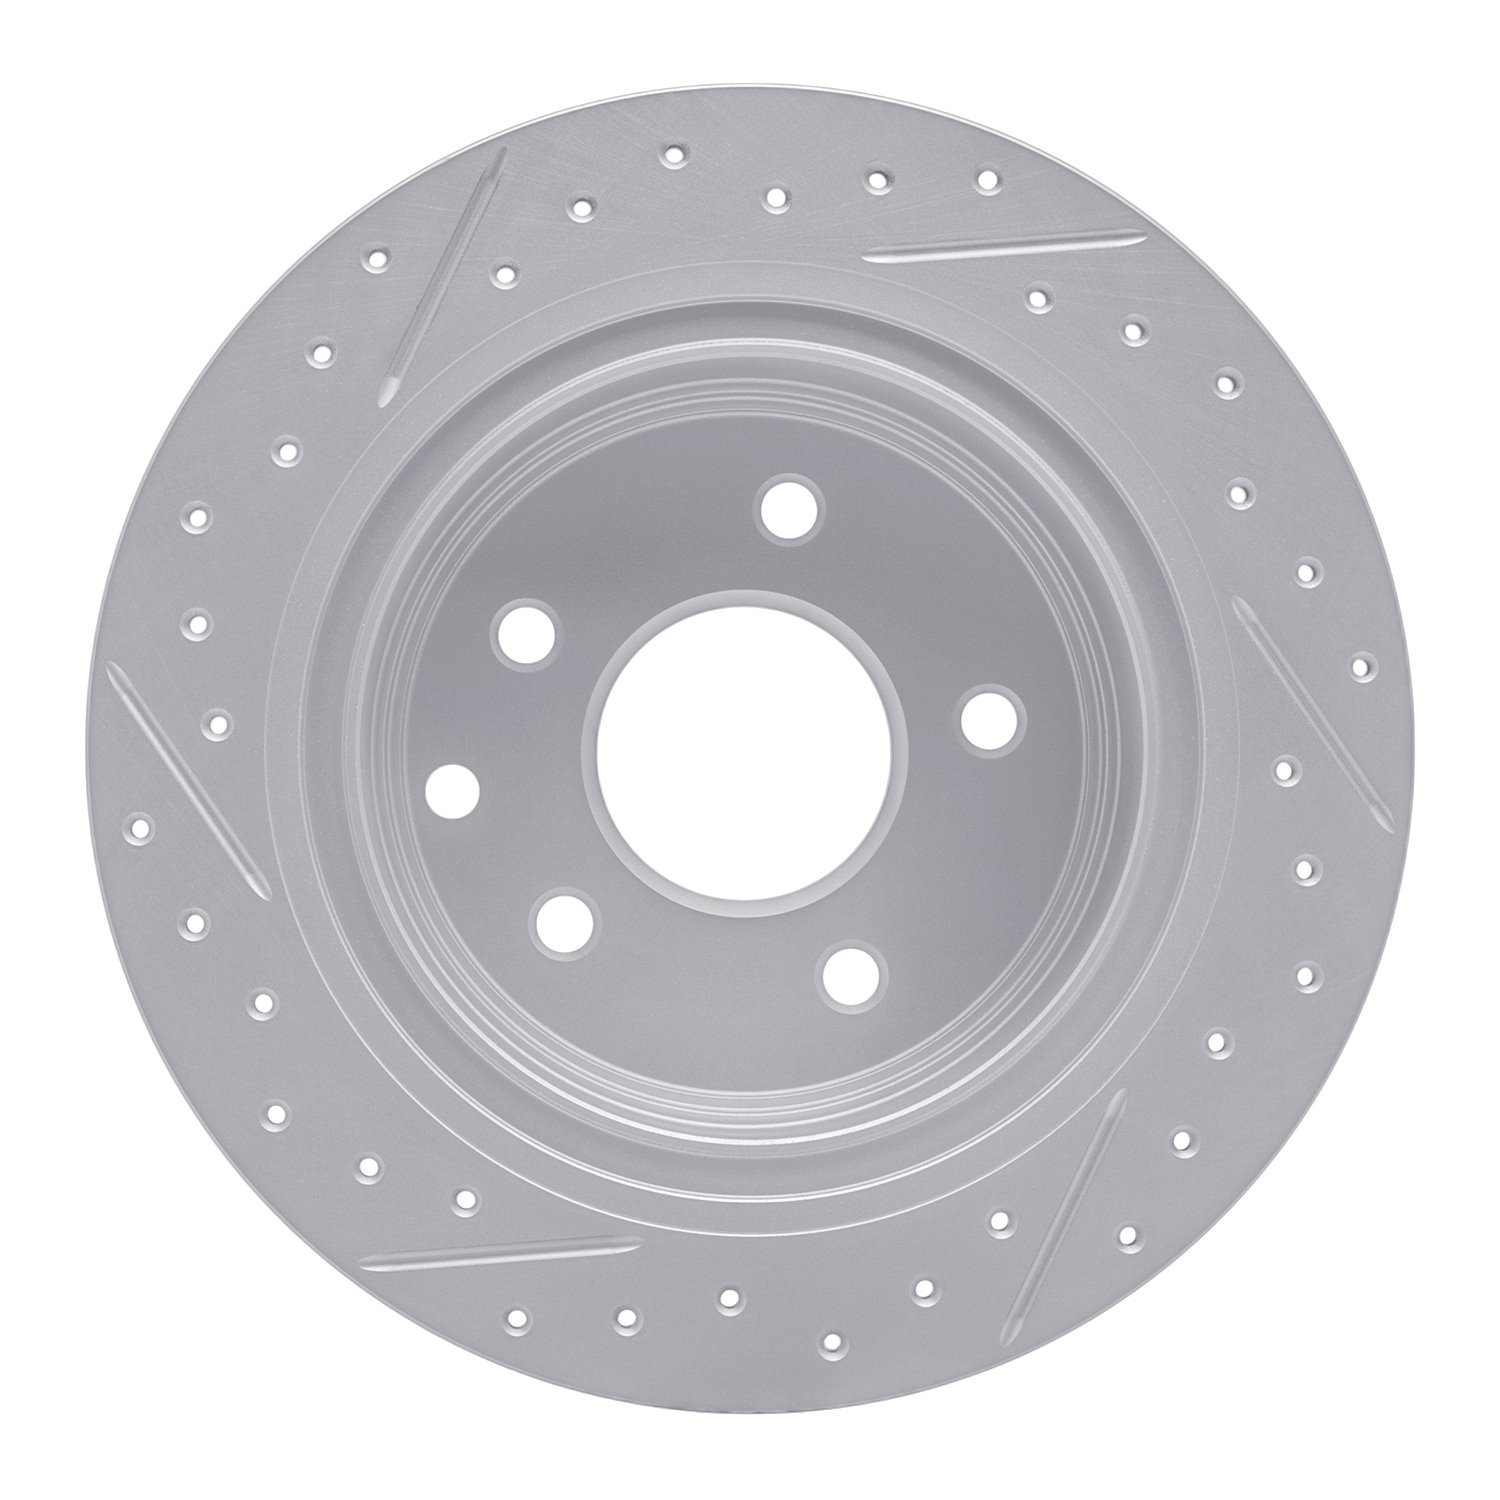 830-67050R Geoperformance Drilled/Slotted Brake Rotor, Fits Select Multiple Makes/Models, Position: Rear Right